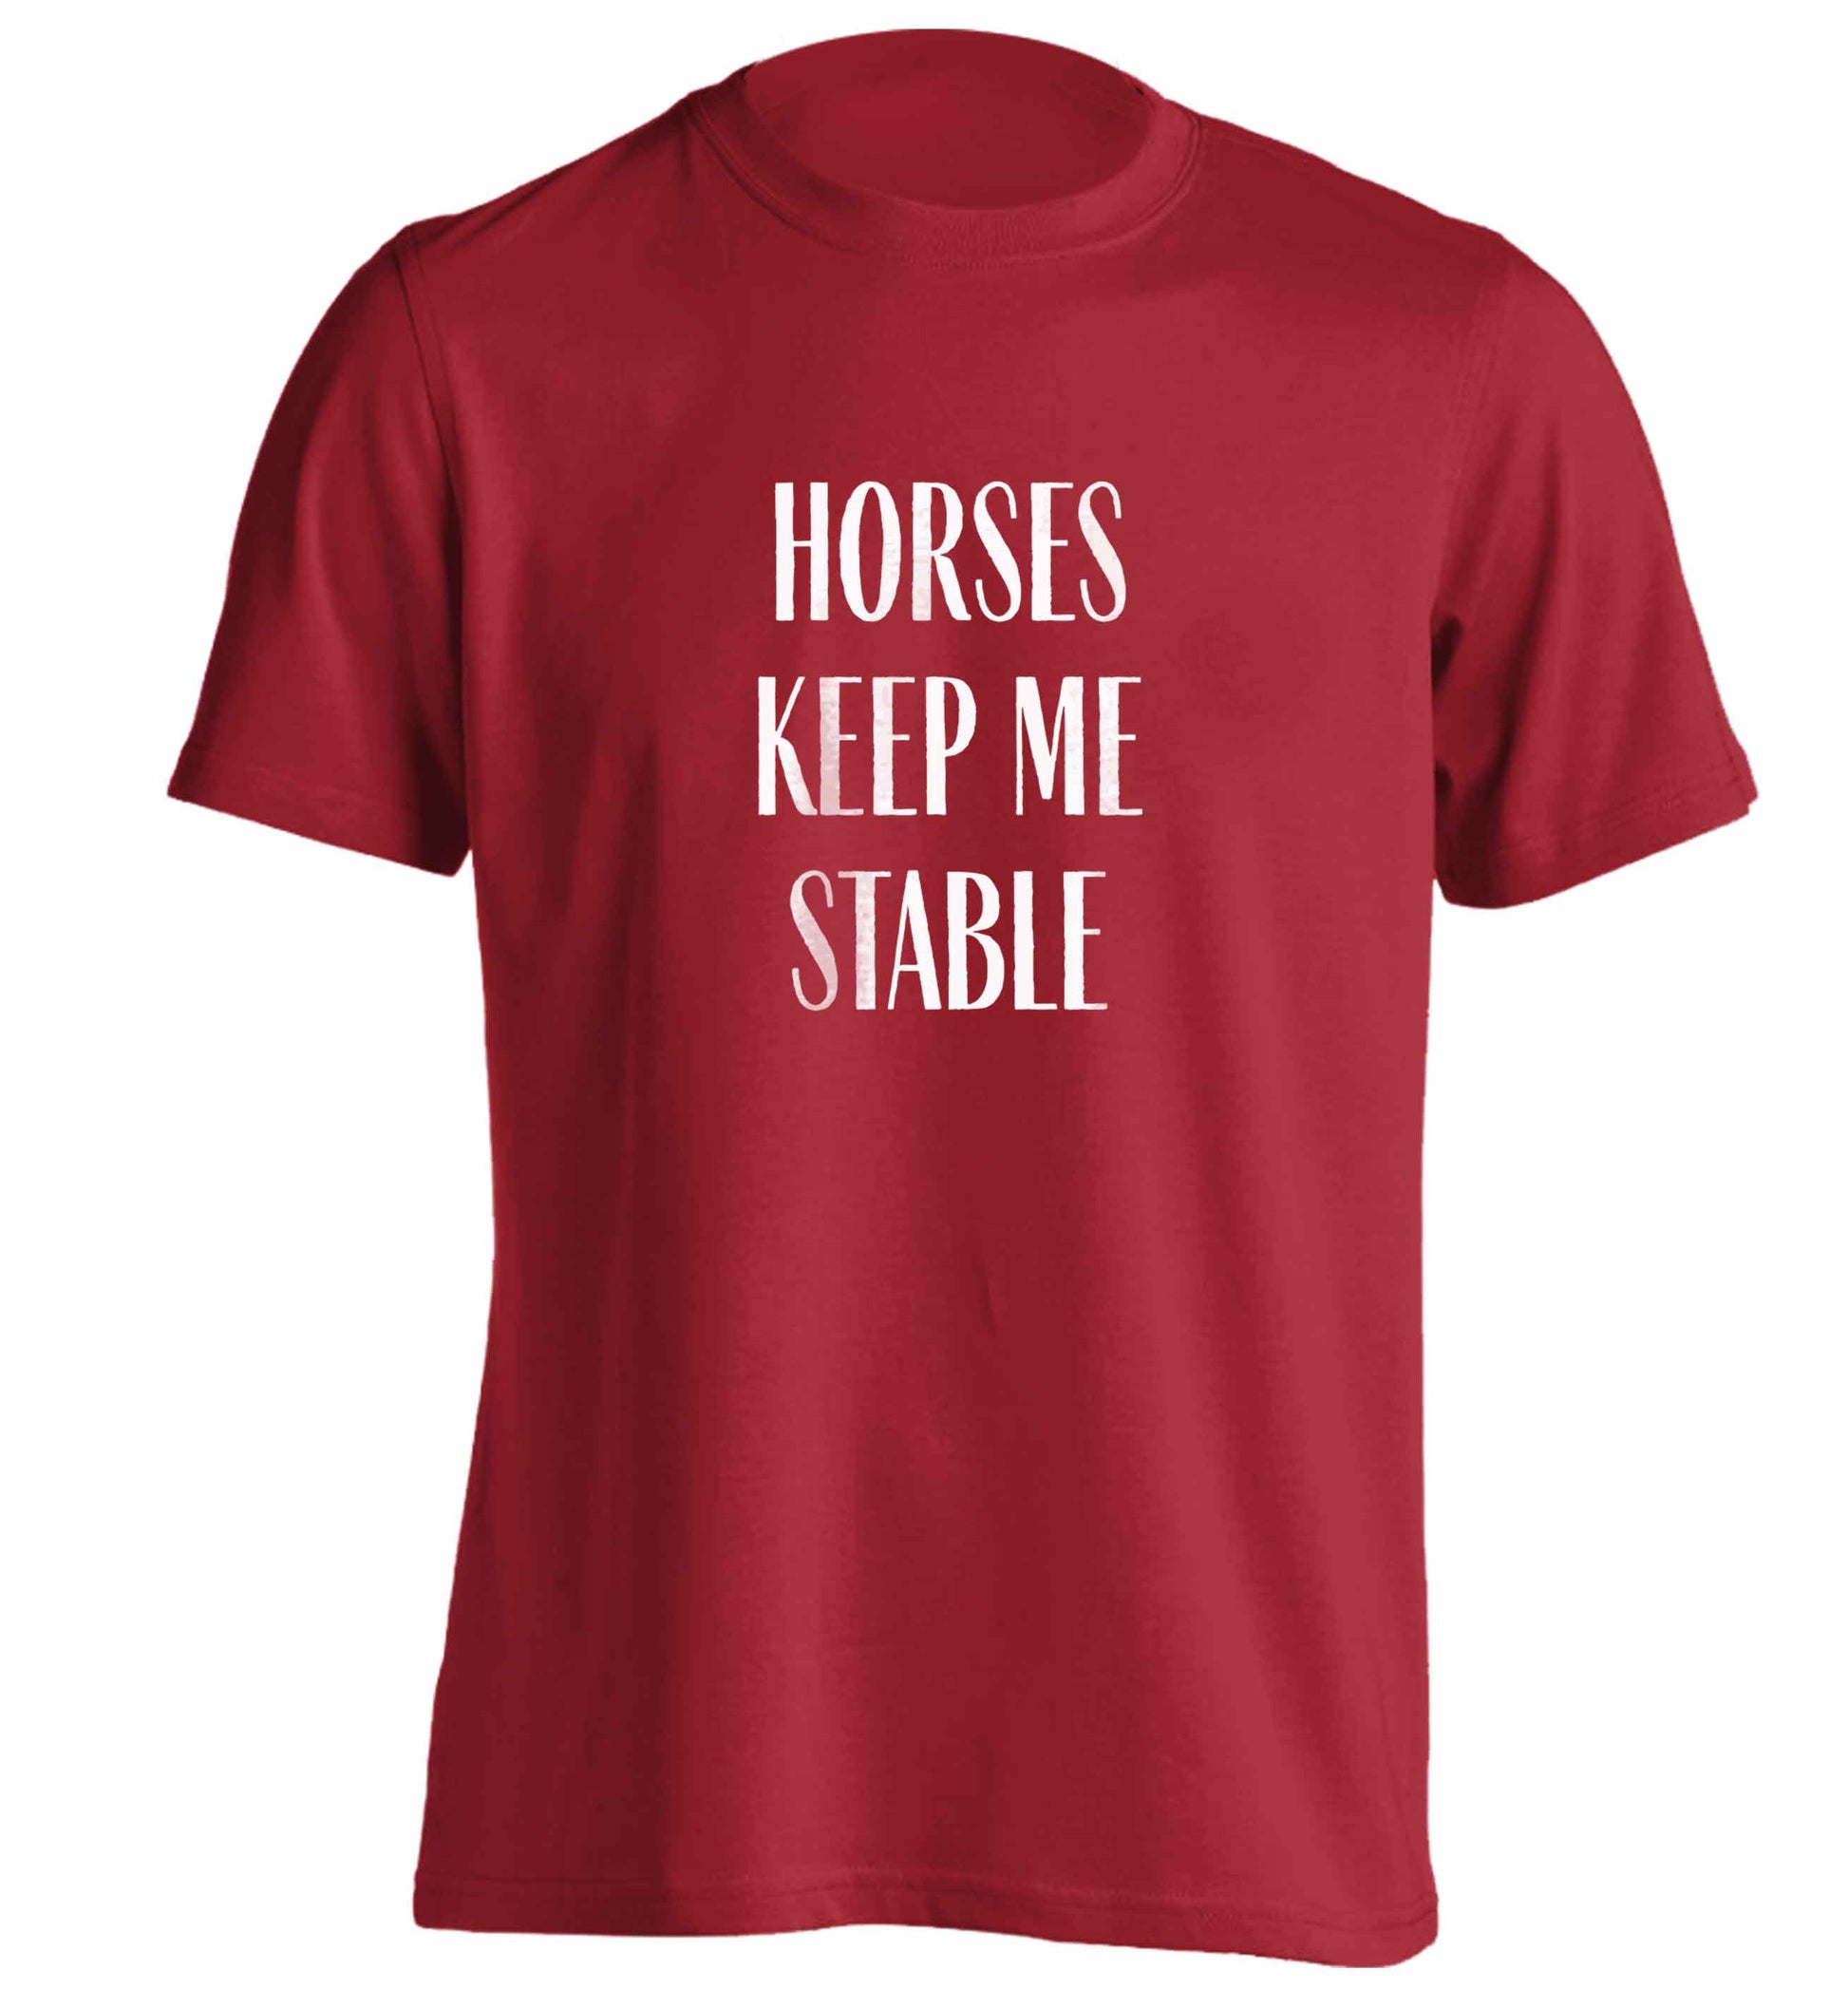 Horses keep me stable adults unisex red Tshirt 2XL